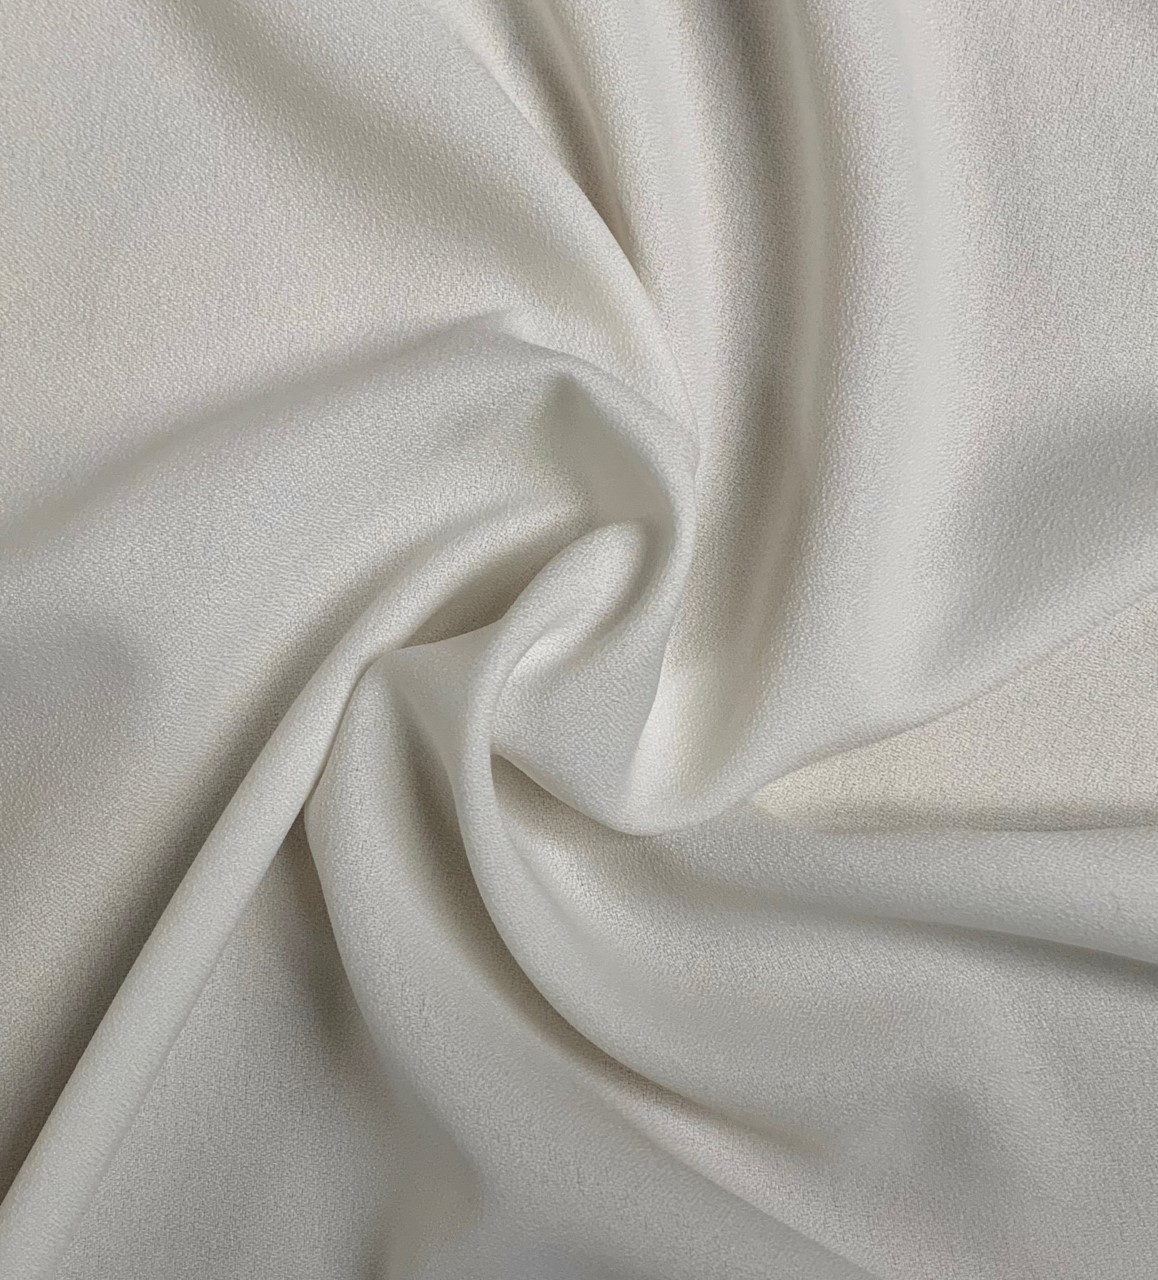 Off-White Crepe Fabric -60" By the yard (100% Polyester) - Click Image to Close